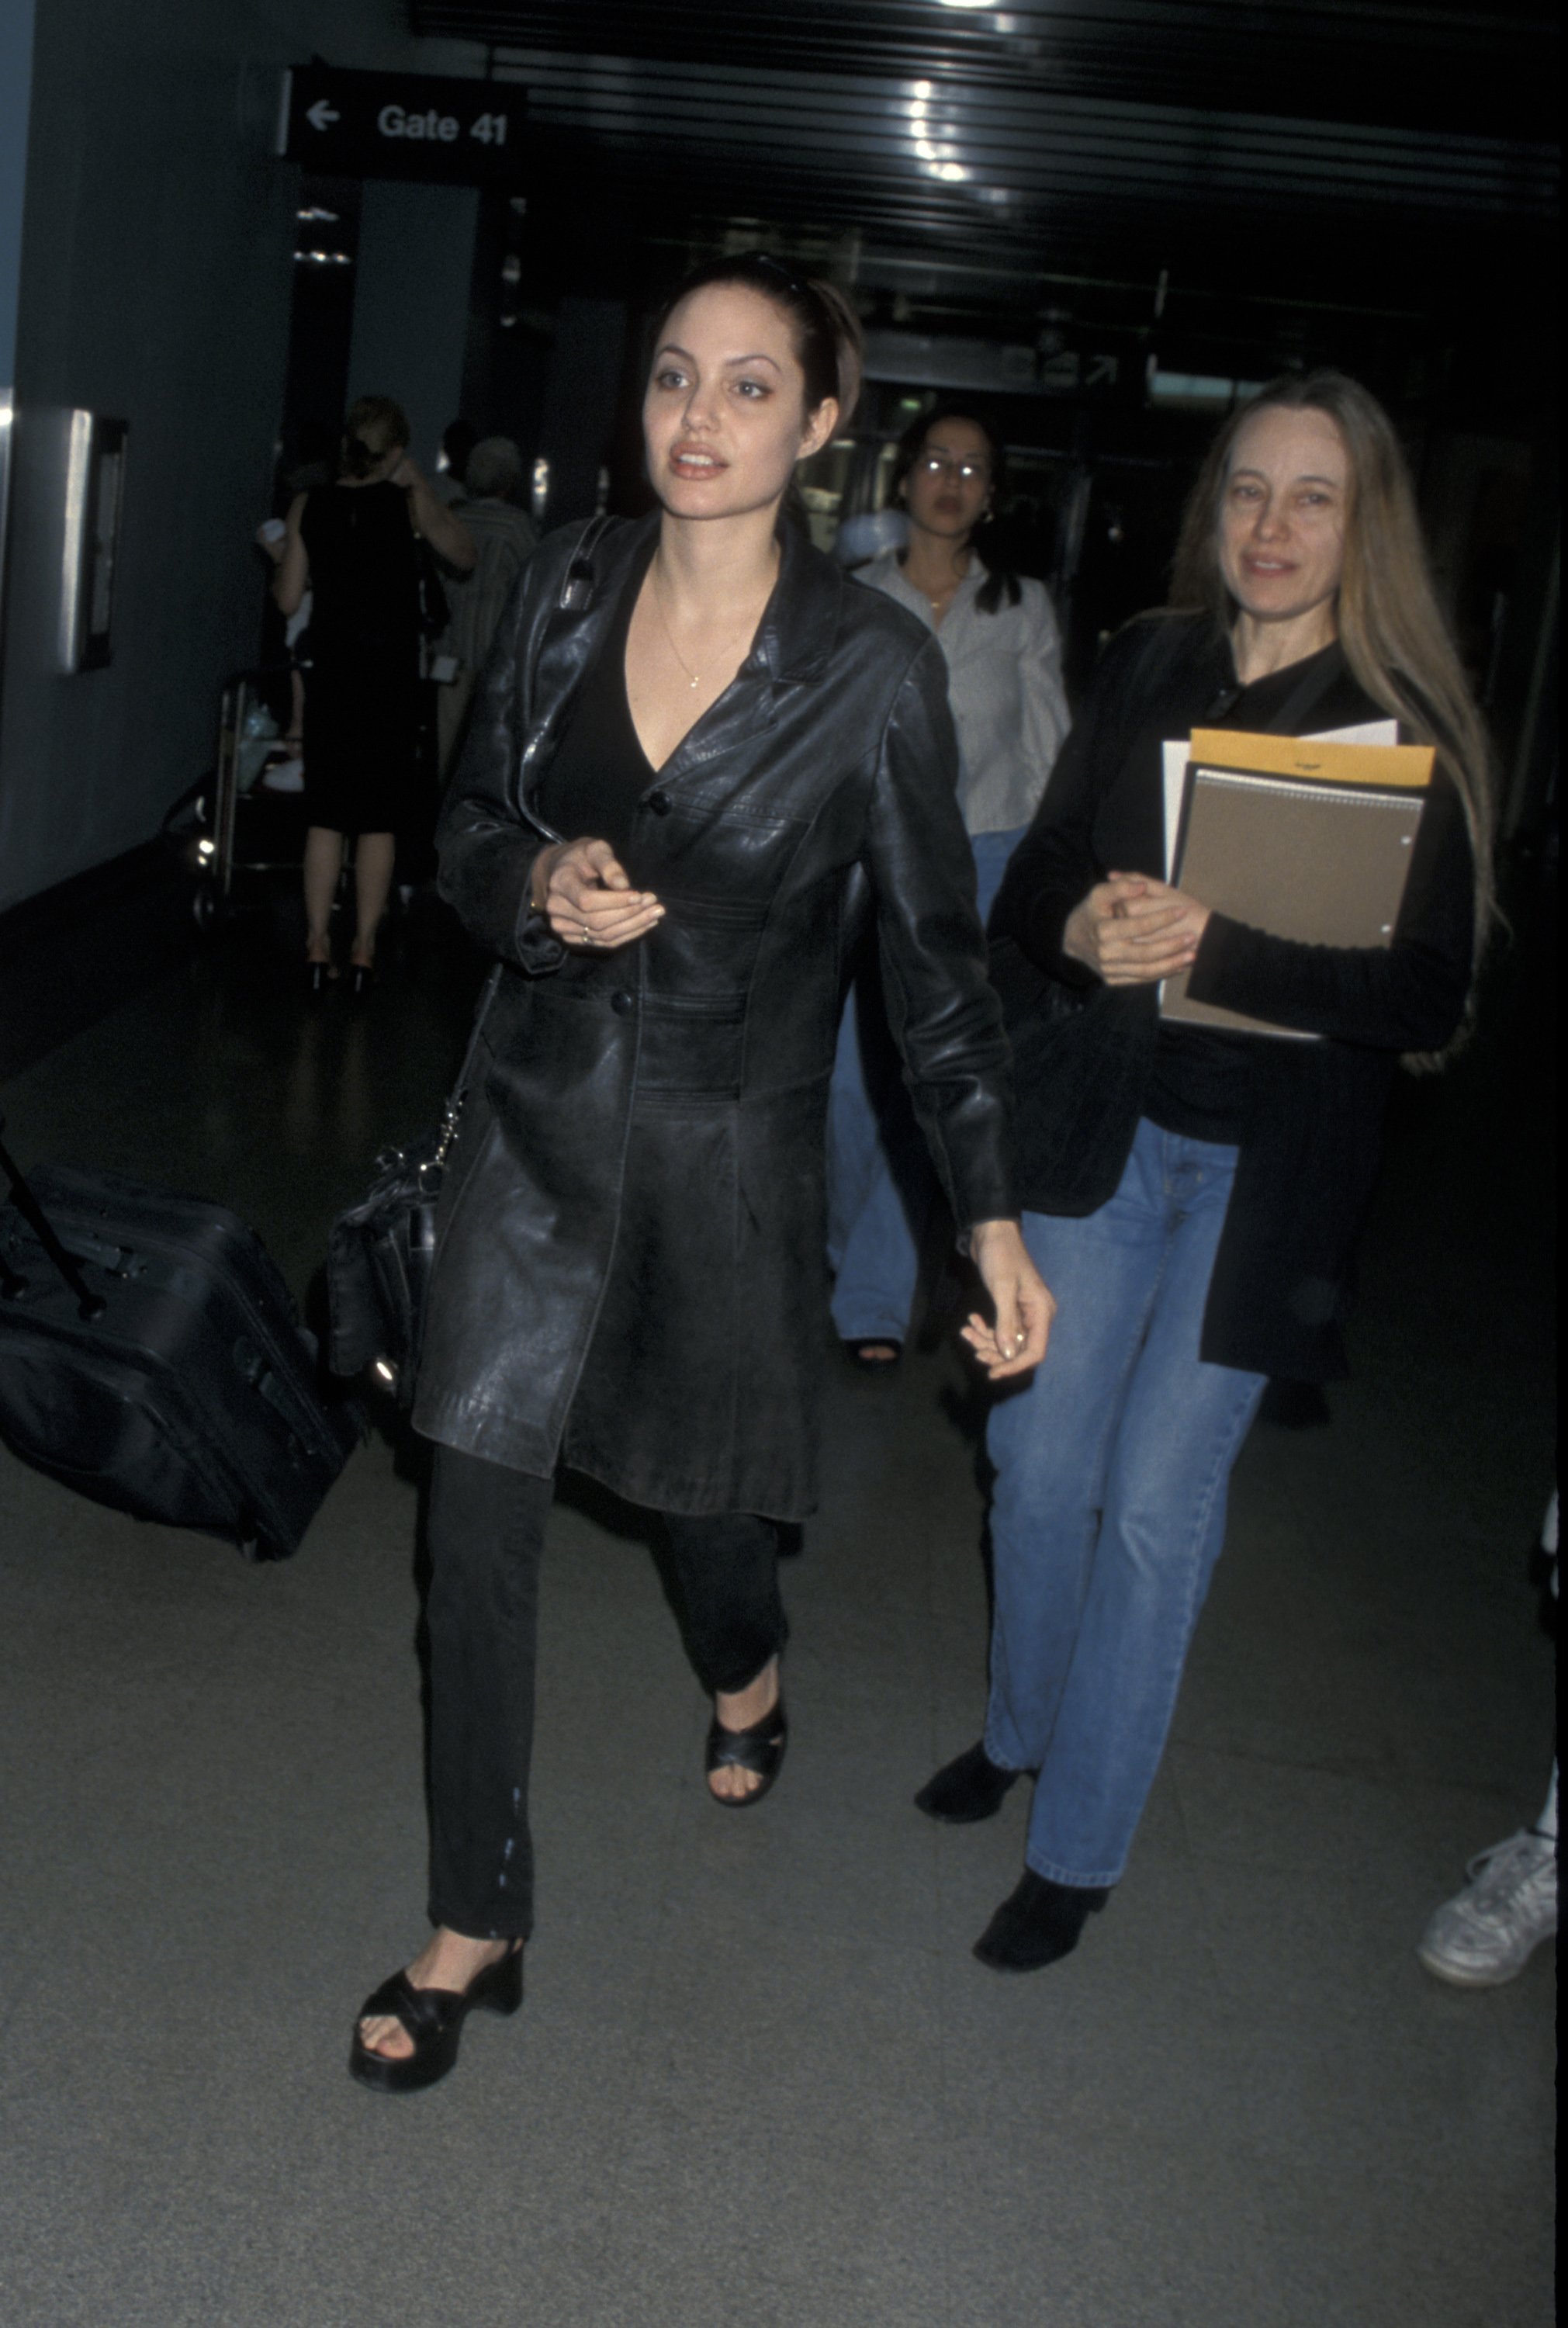 Angelina Jolie and her mother Marcheline Bertrand in Los Angeles on August 4, 1998 | Photo: Getty Images